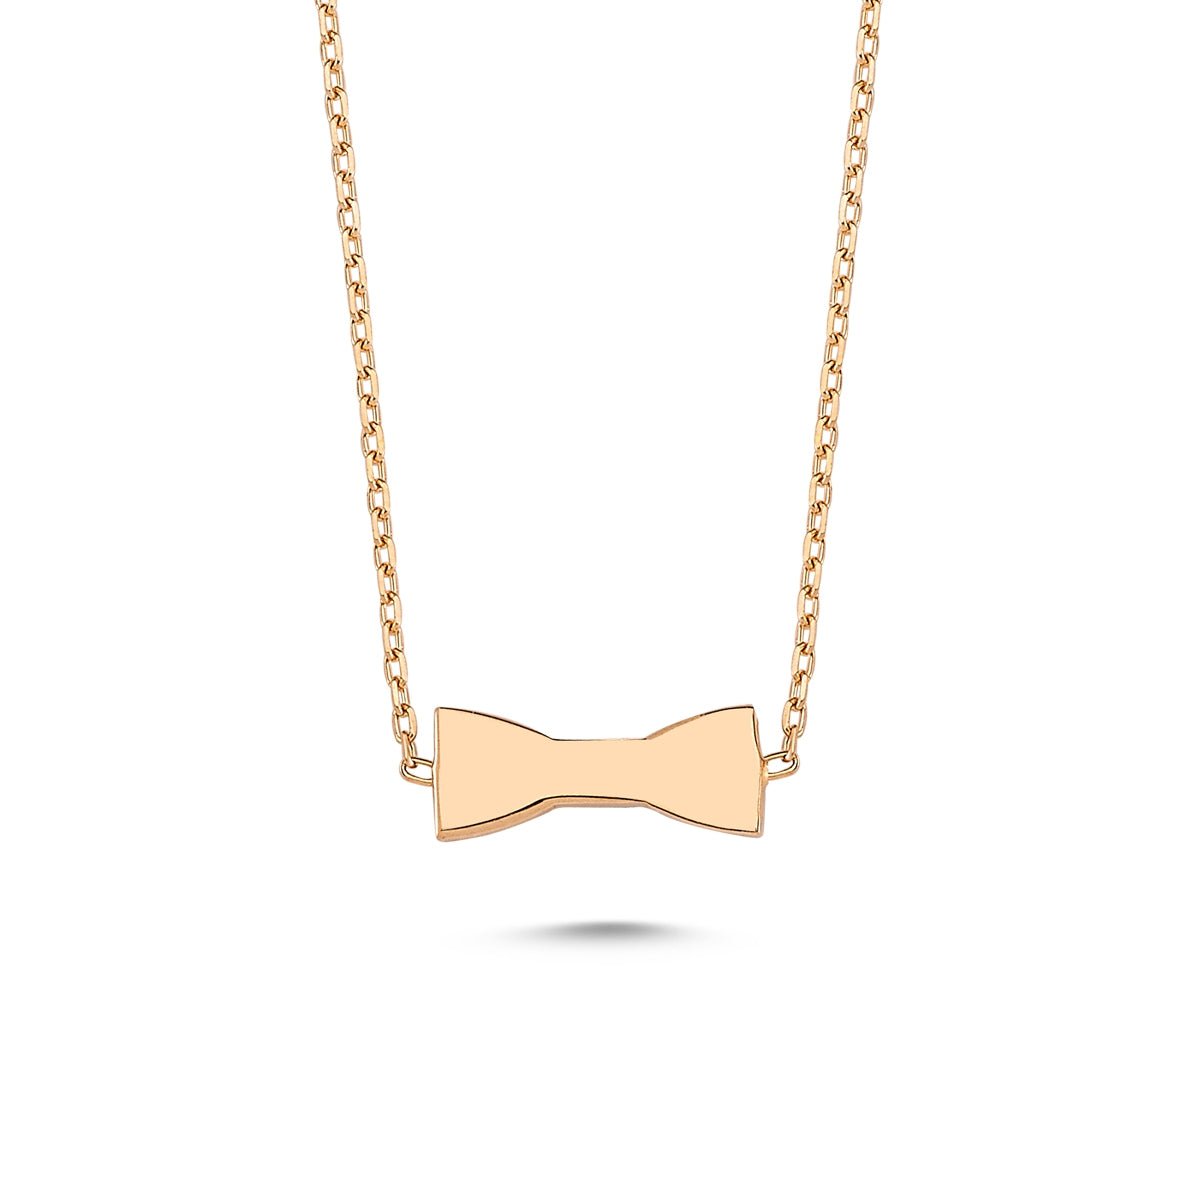 Bow Tie Necklace in Rose - amoriumjewelry